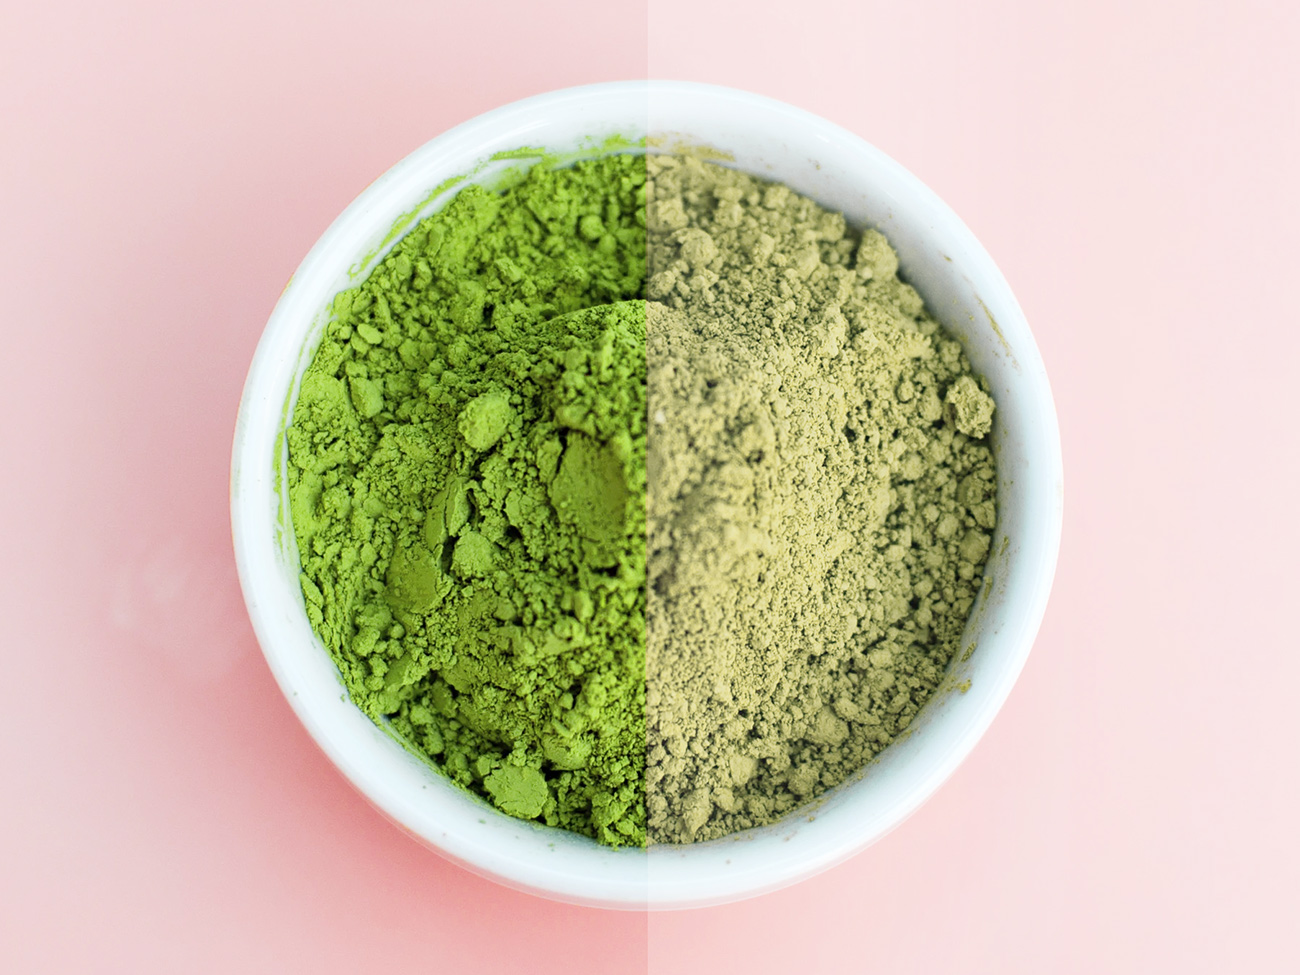 Green Tea Powder vs. Matcha: What's the Difference?